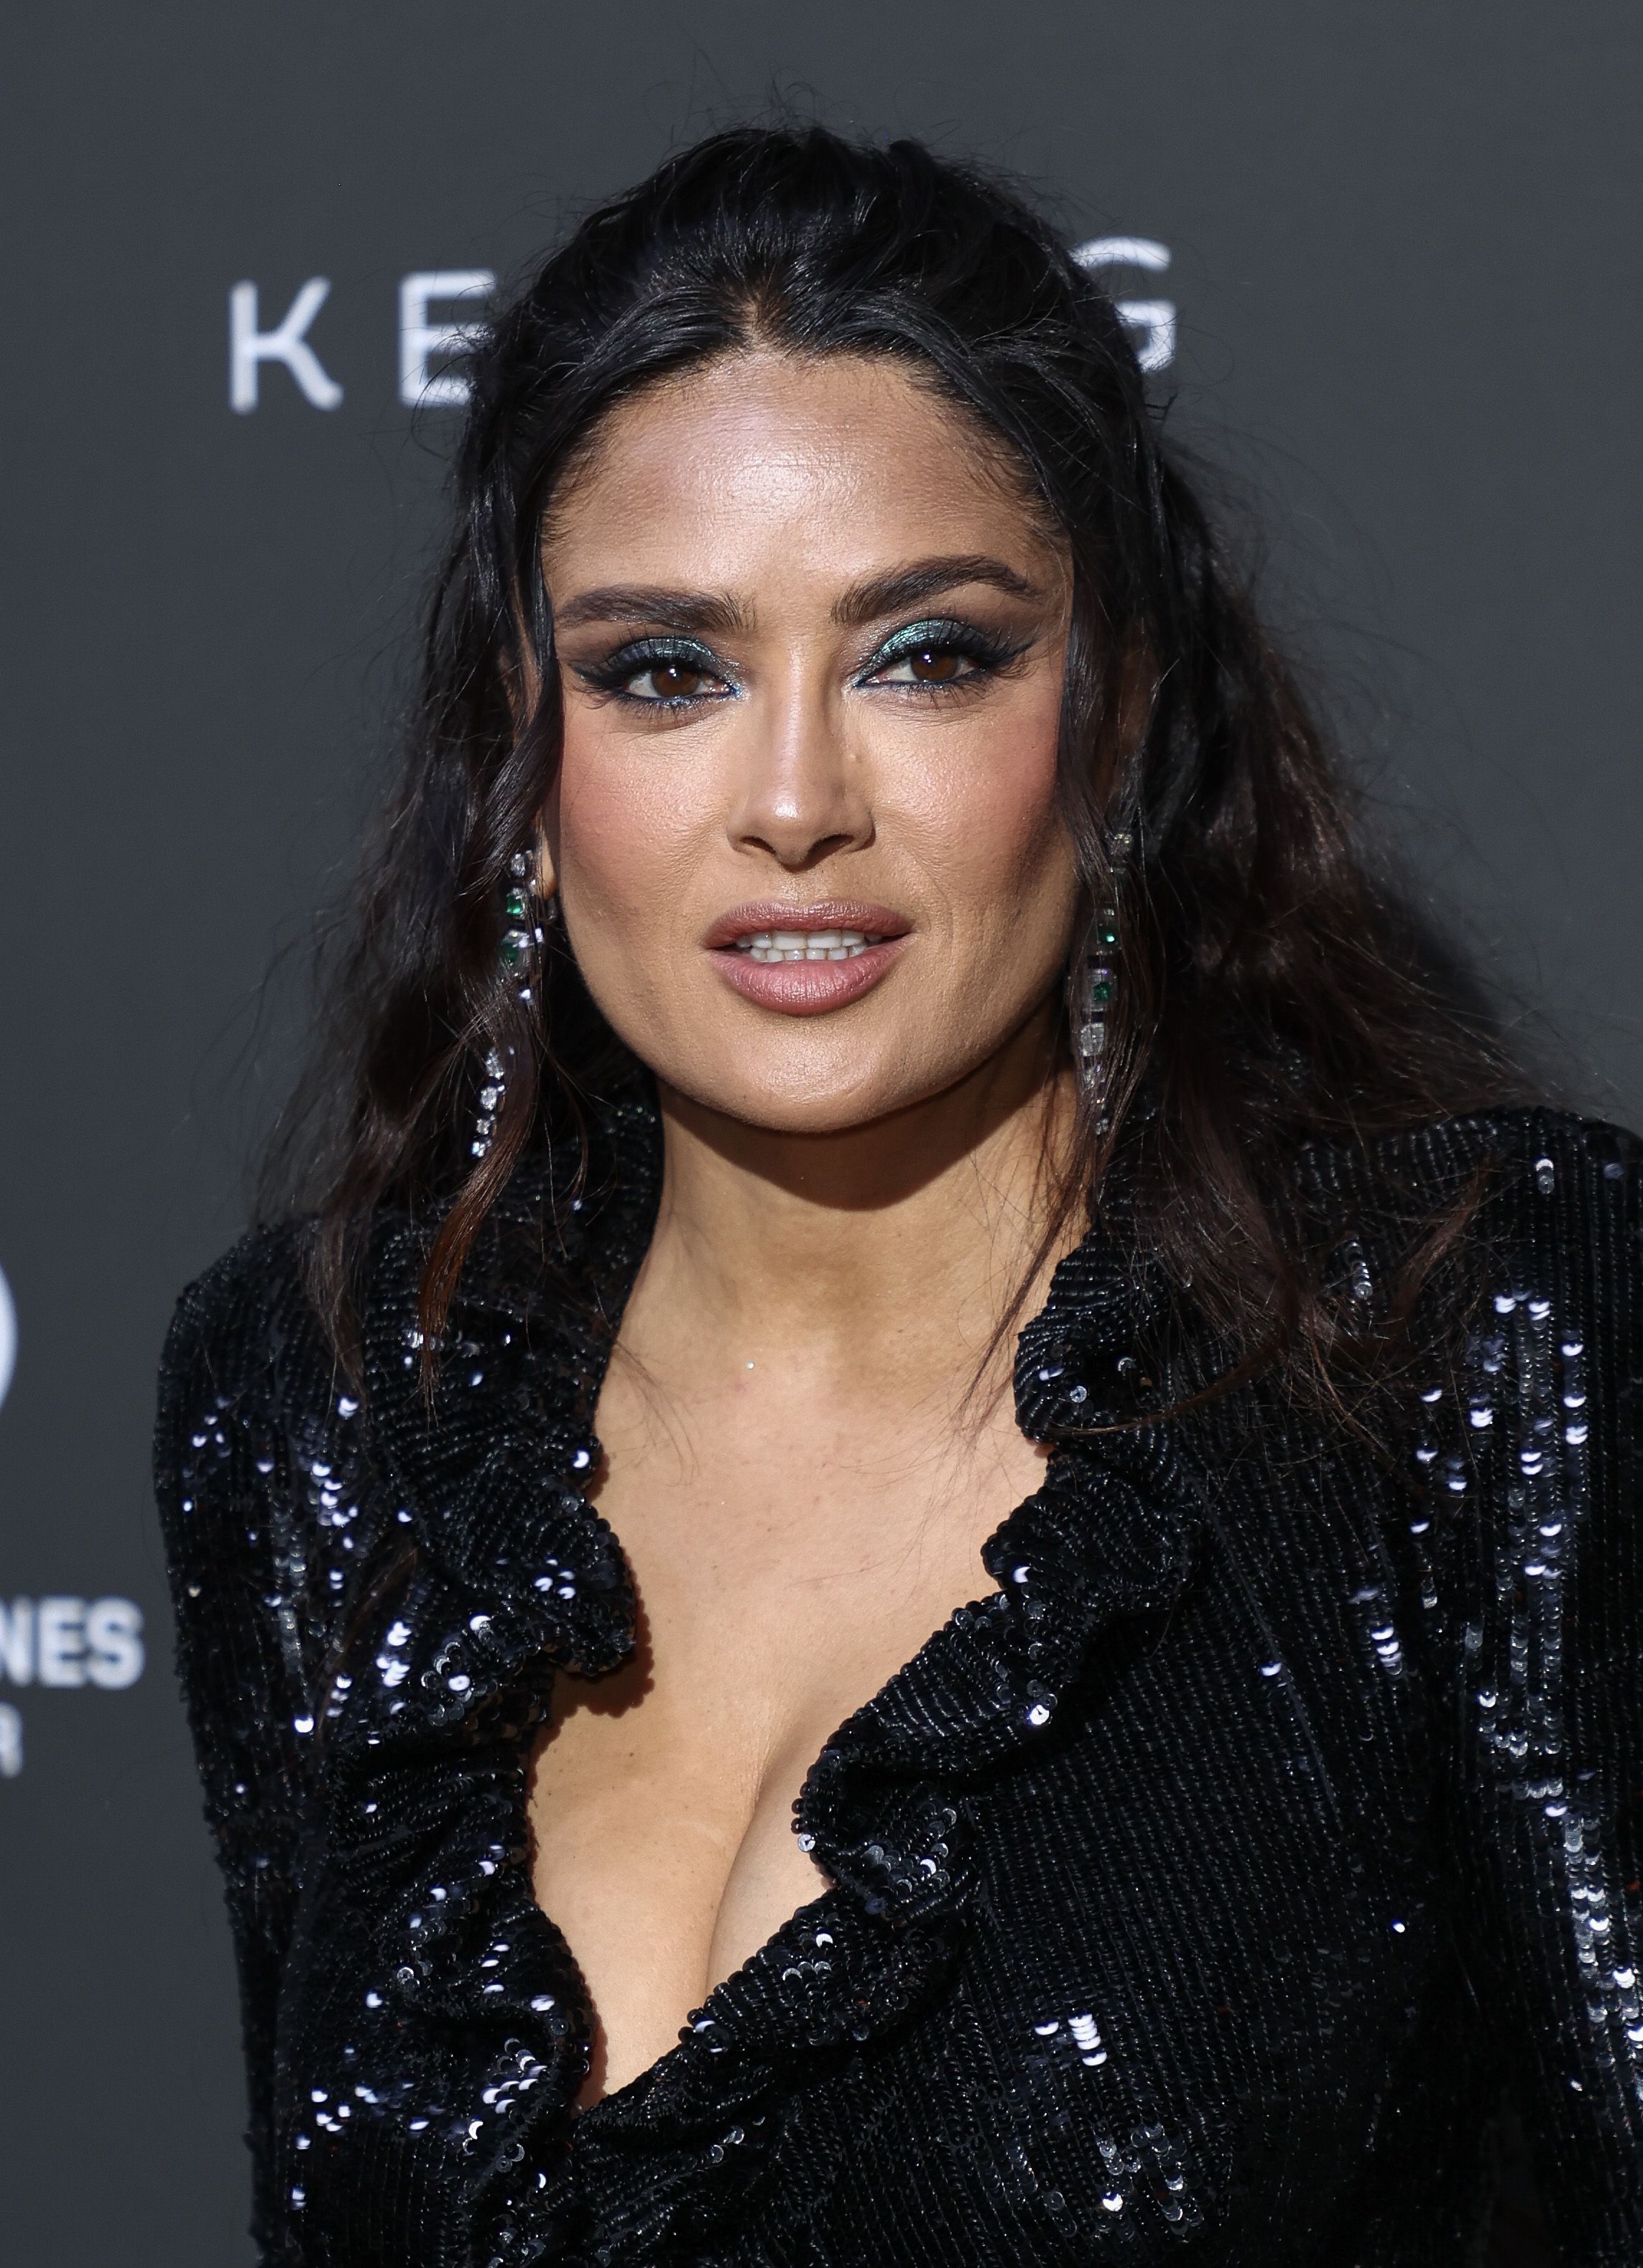 Salma Hayek, 56, Poses Nude, Showing Off Abs in Sauna pic